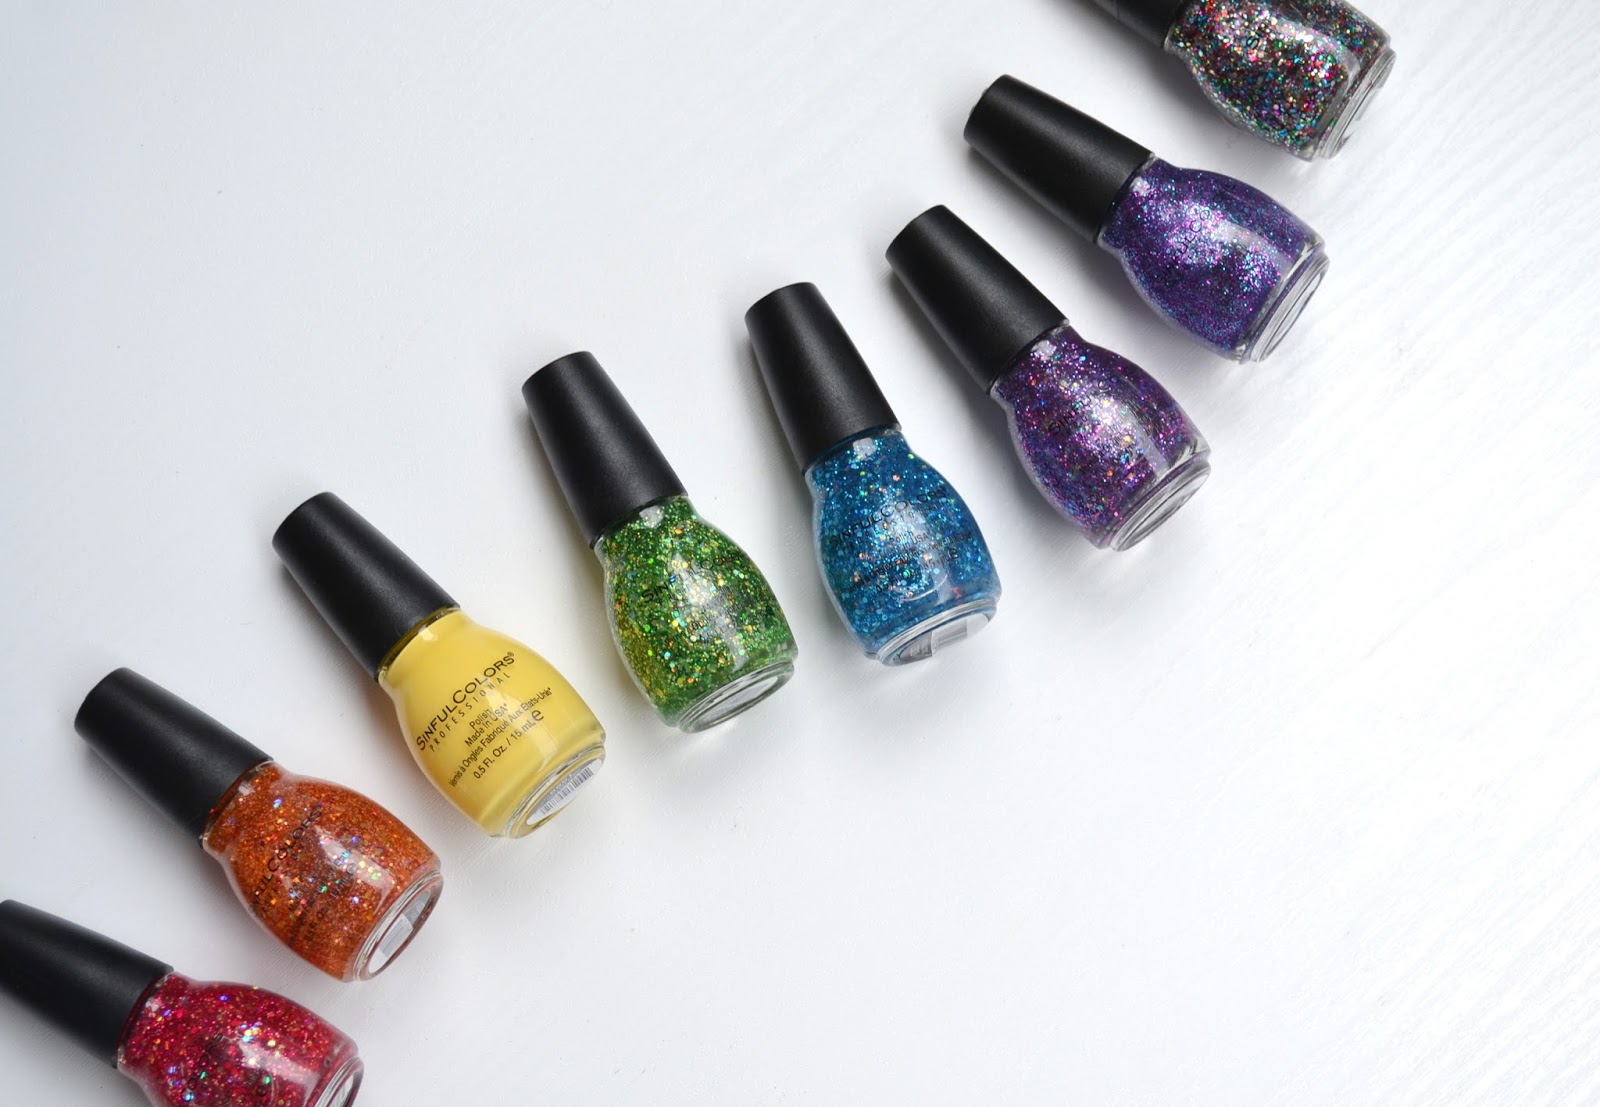 Sinful Colors Pride Nail Polish Collection - wide 5